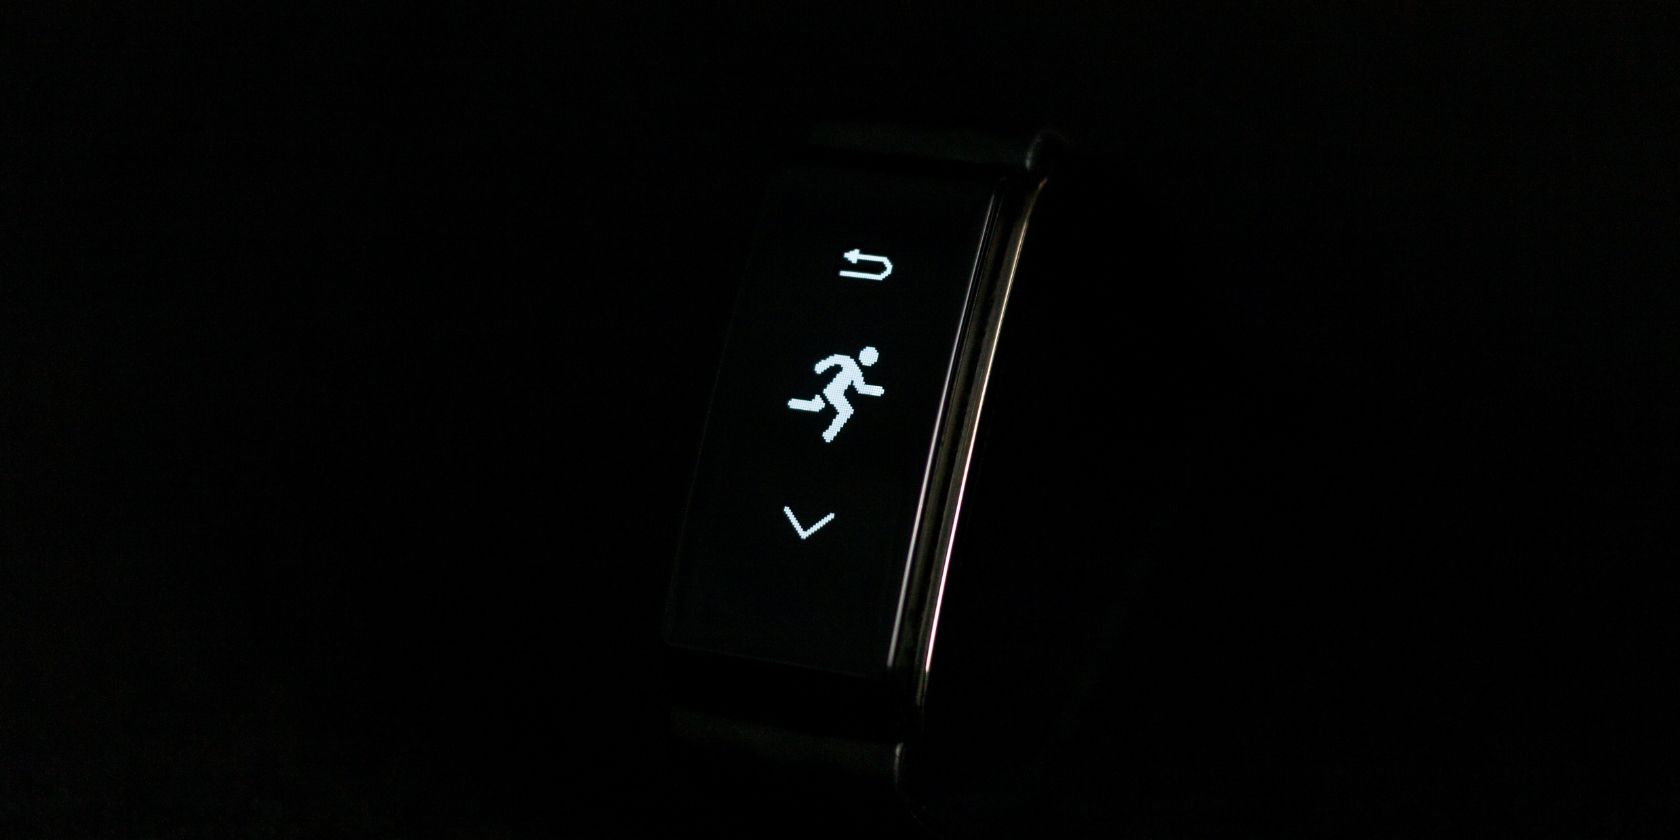 Fitness tracker with graphic of person running